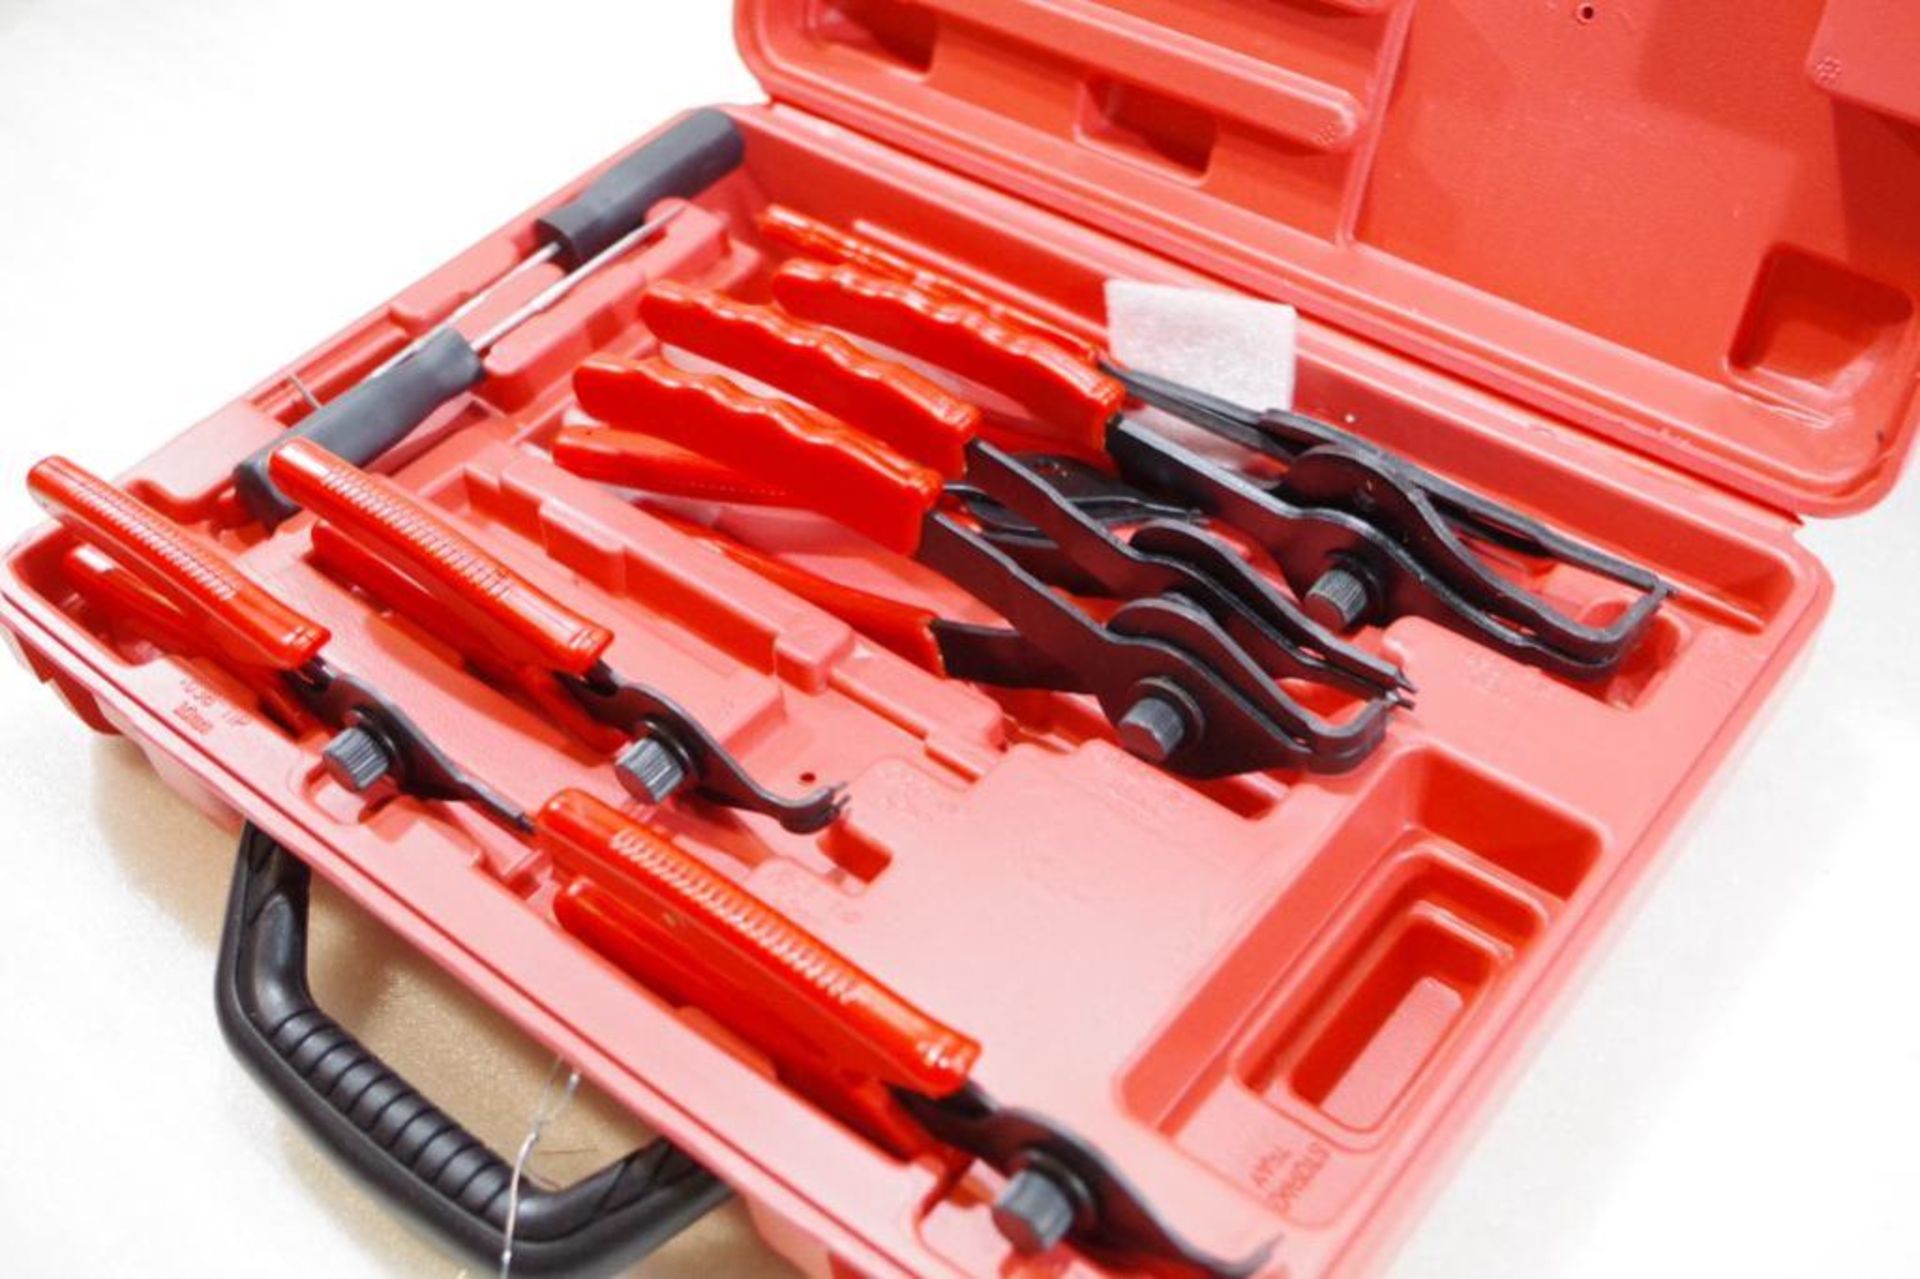 NEW 11-Piece Snap Ring Pliers Set w/ Case